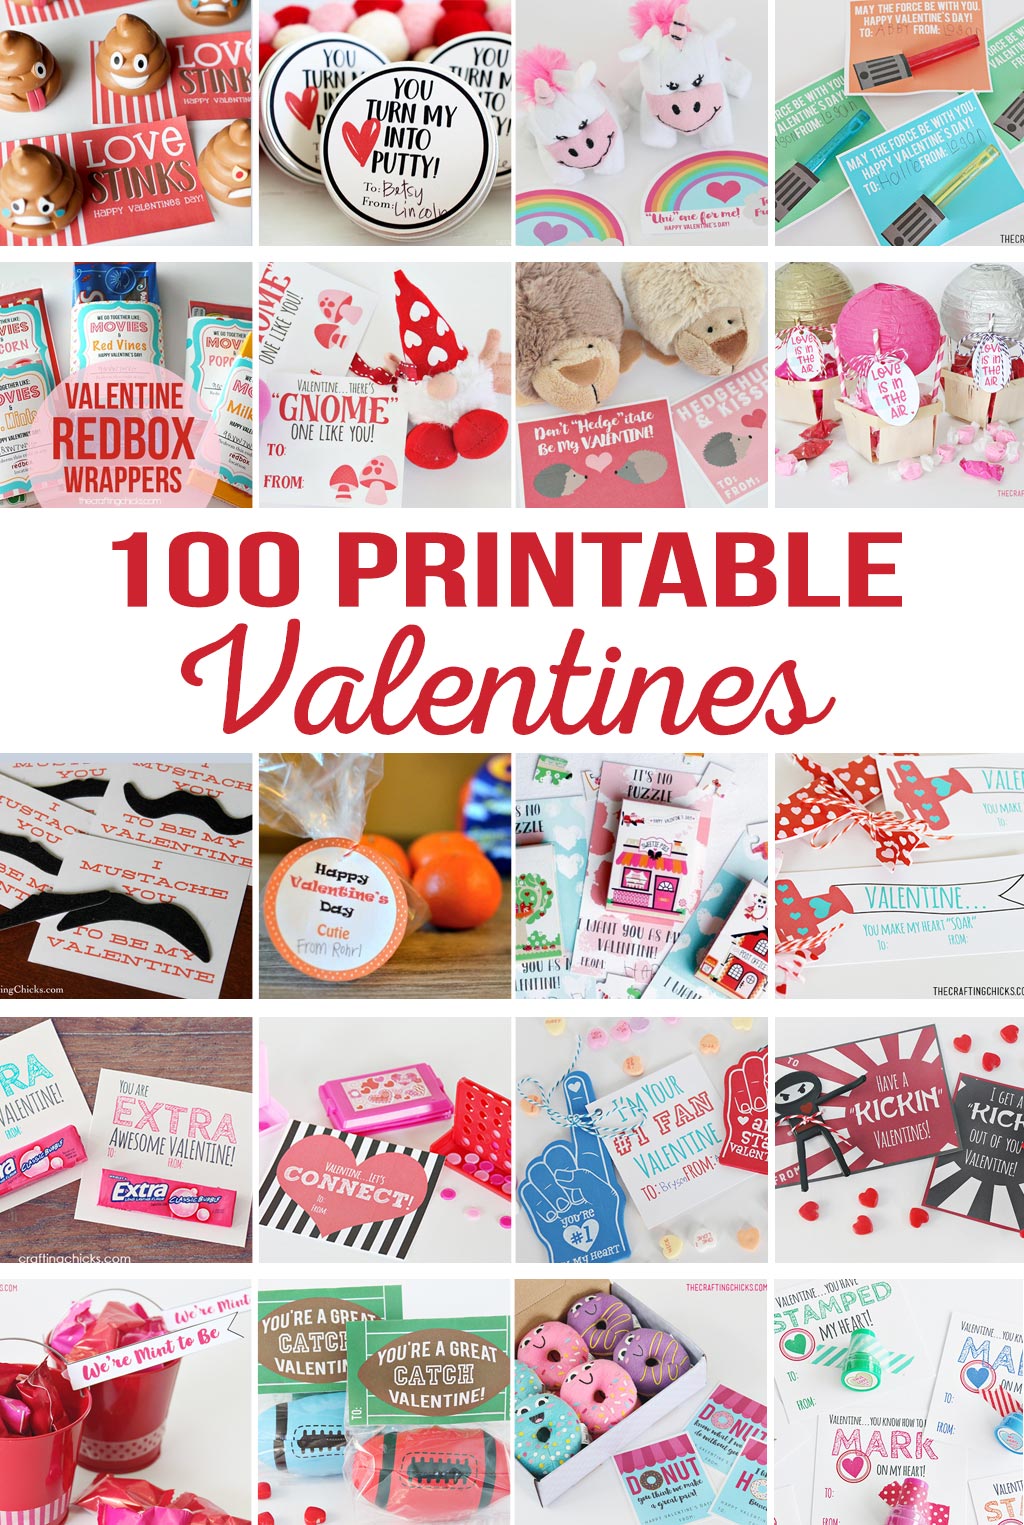 DIY Printable Valentines | Printables Valentines for school, teachers, friends, family, kids, and spouses. So many Valentine printables in one place!